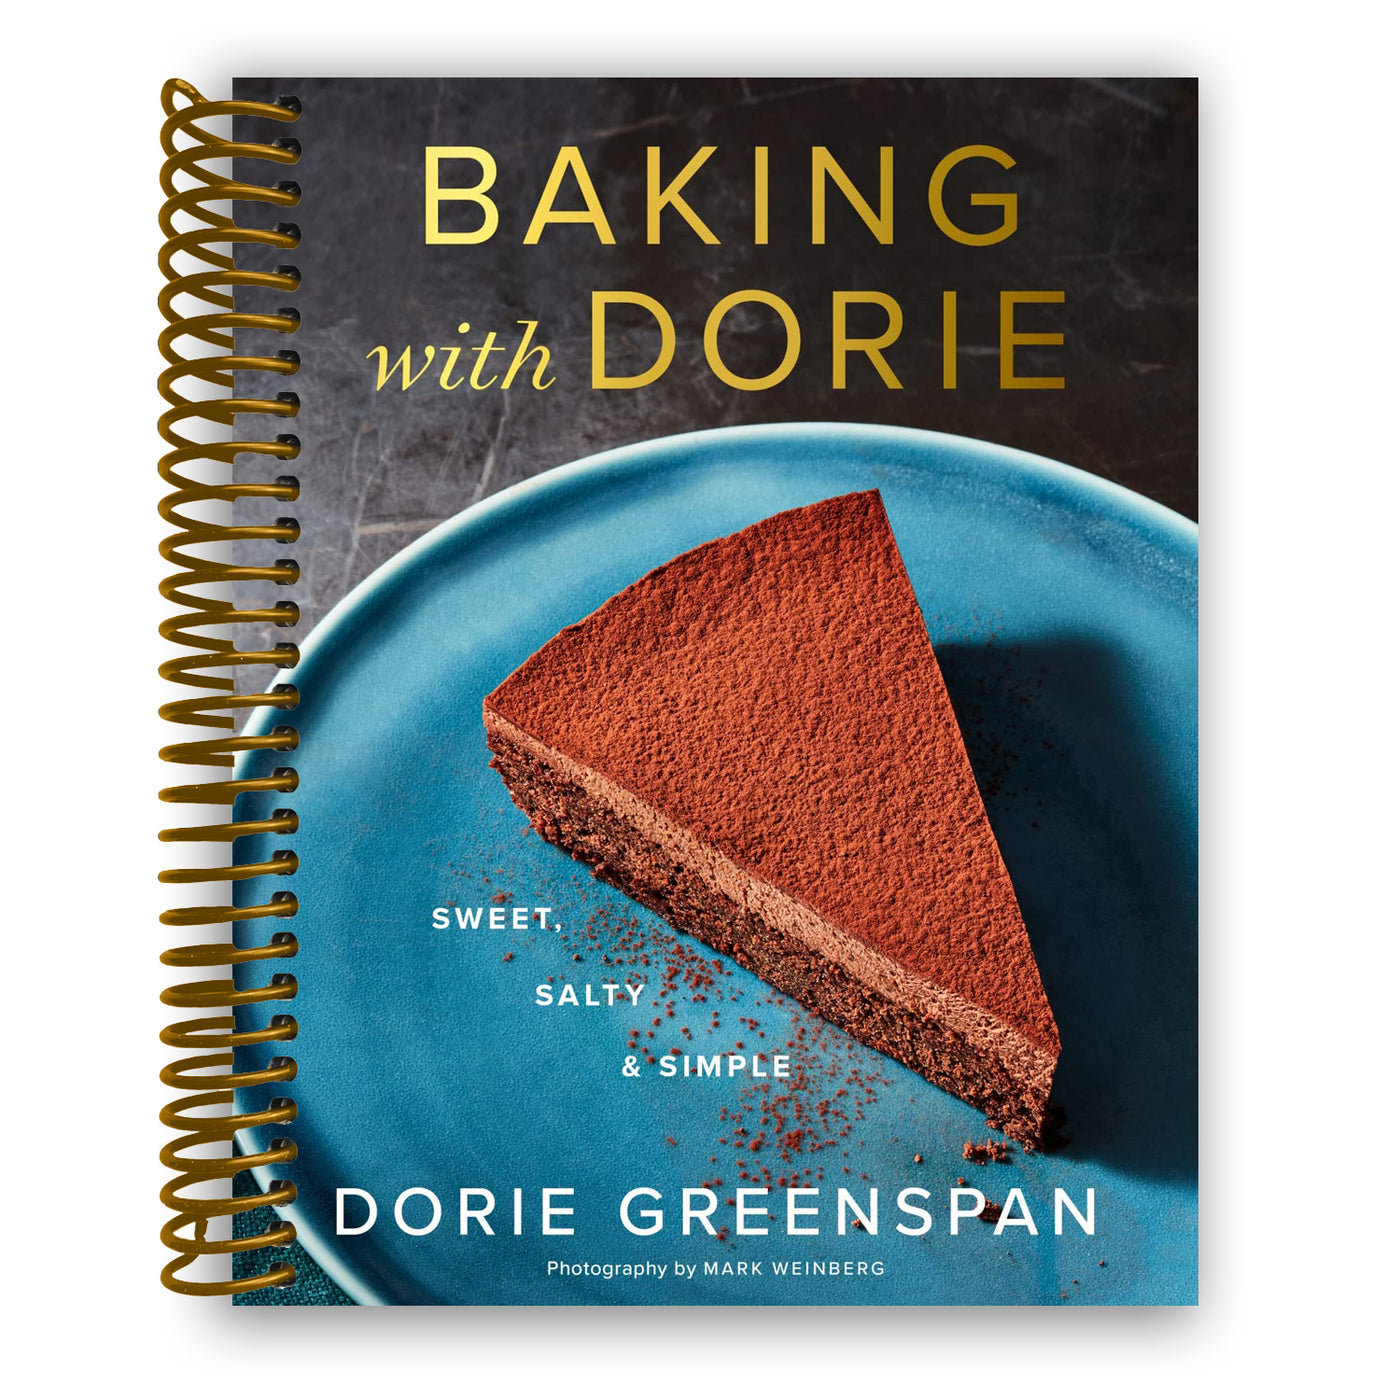 Baking with Dorie: Sweet, Salty & Simple (Spiral Bound)